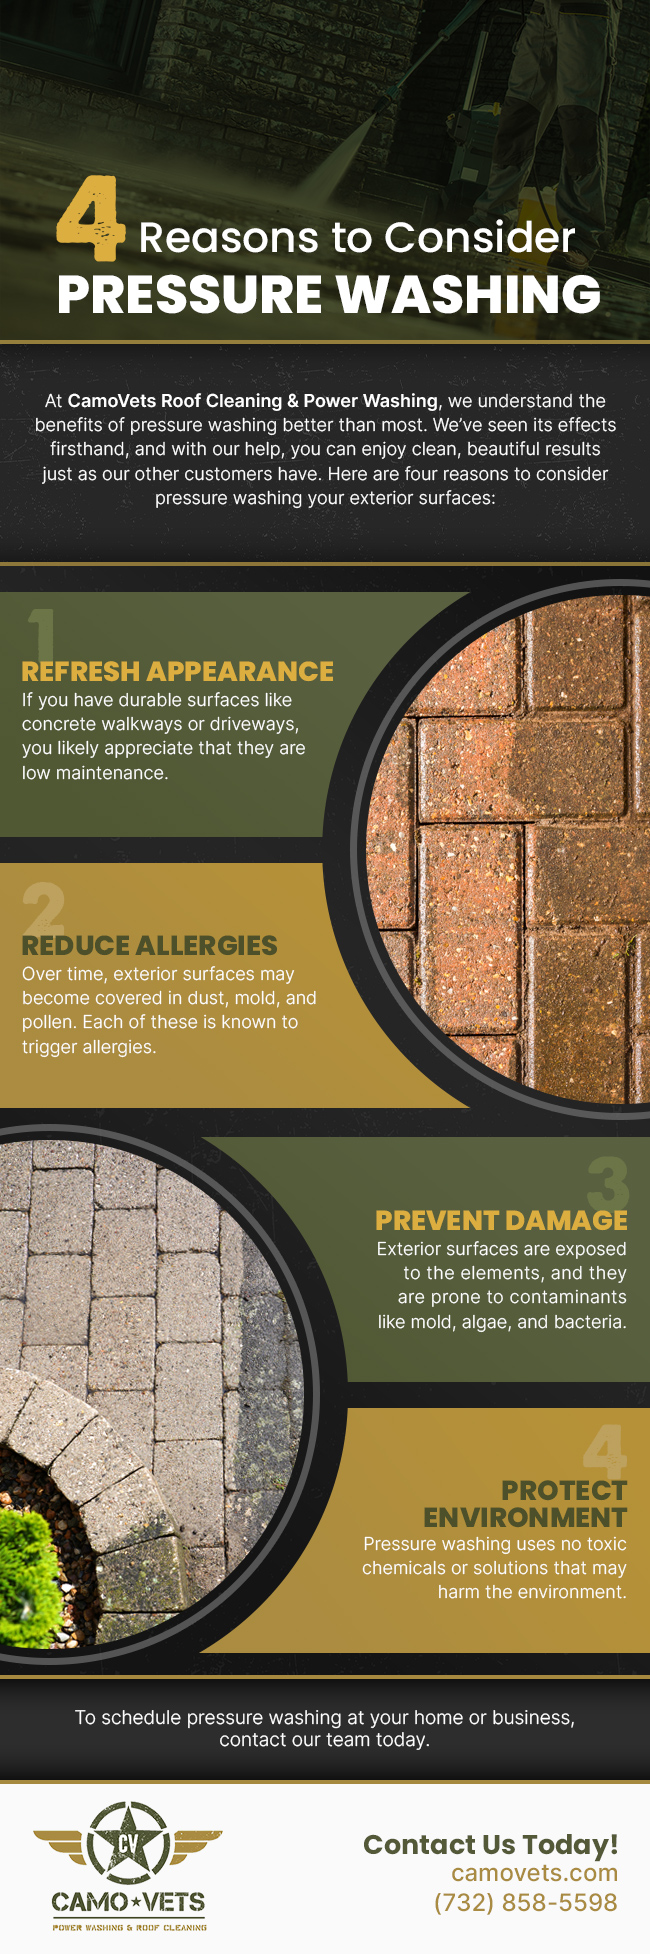 Pressure washing is often a good choice for durable exterior surfaces.